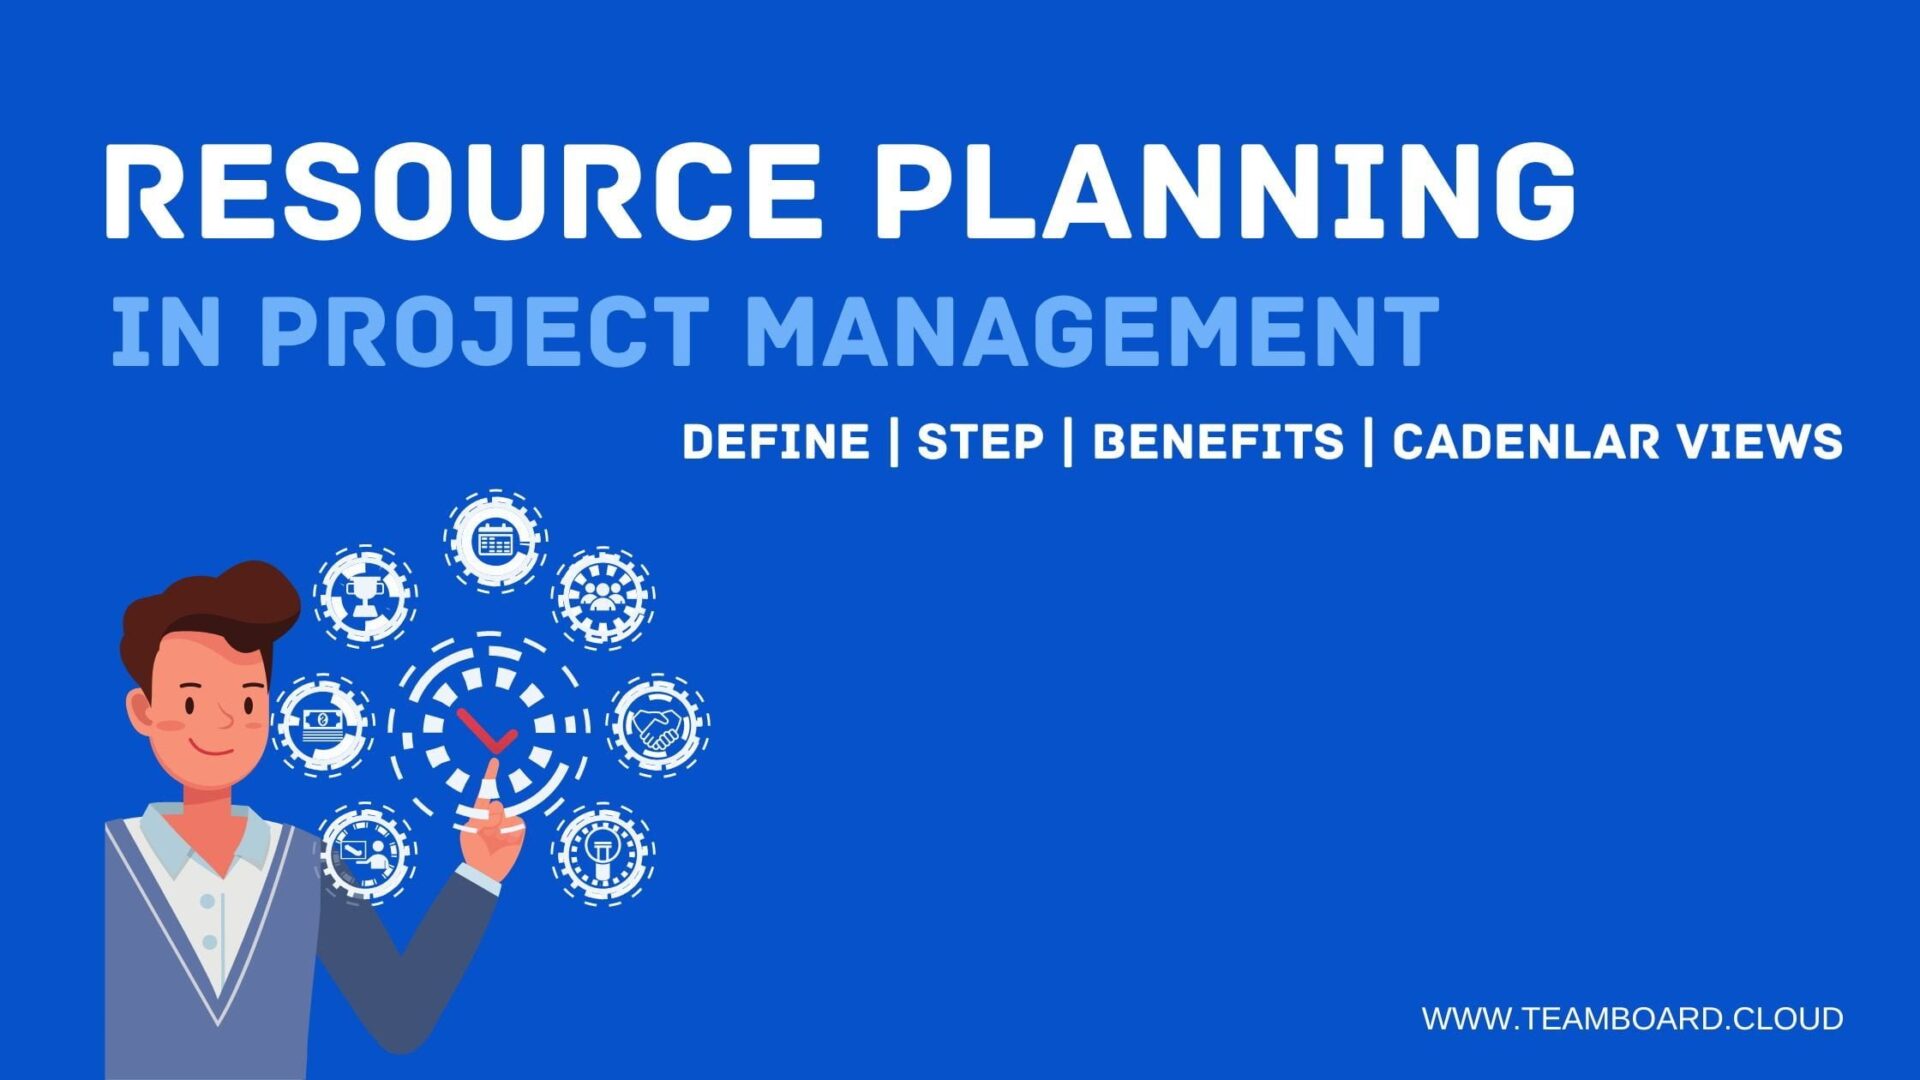 Resource Planning in Project Management with Calendar Views